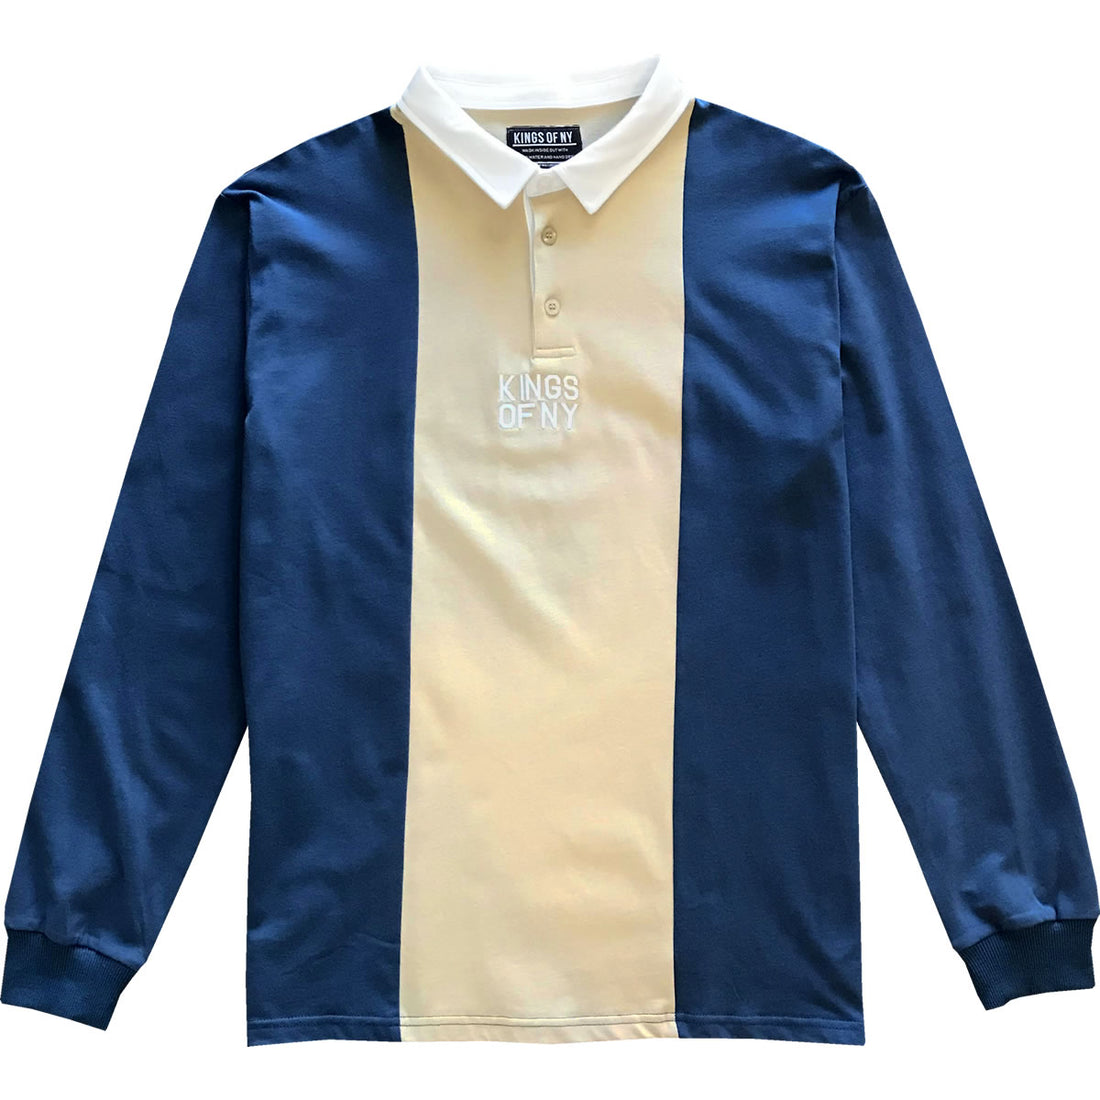 Kings of NY Dusty Blue and Light Blue Two Tone Split Long Sleeve Rugby Shirt XX-Large / Dusty Blue